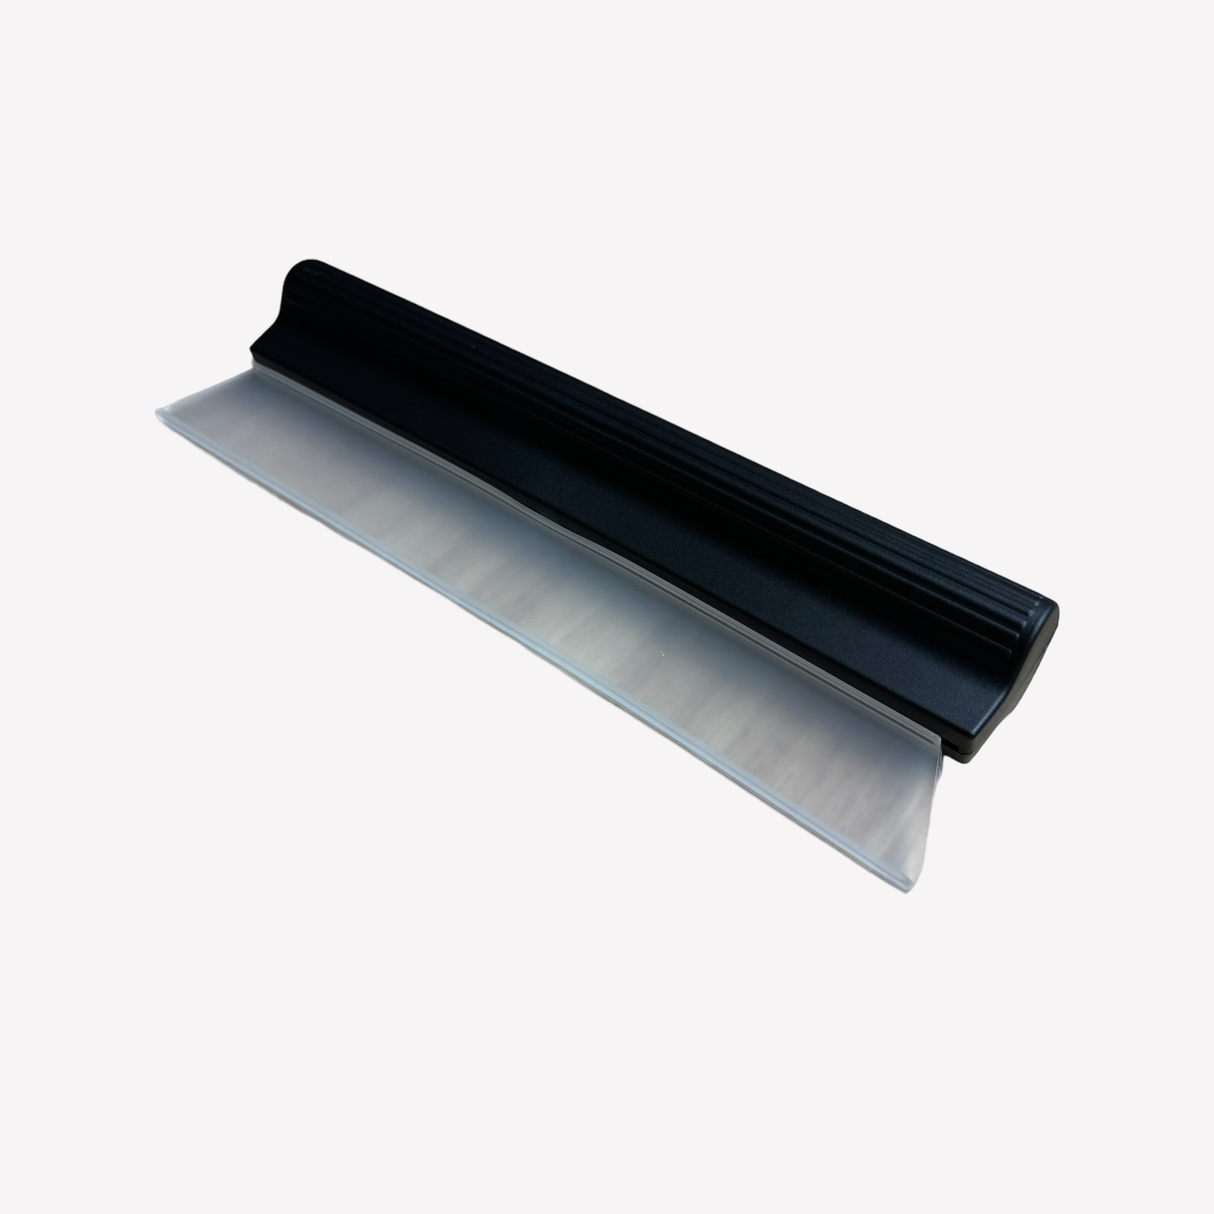 Silicone Blade Squeegee For Cars & Windows Detailing Must Have Dry In Half the Time